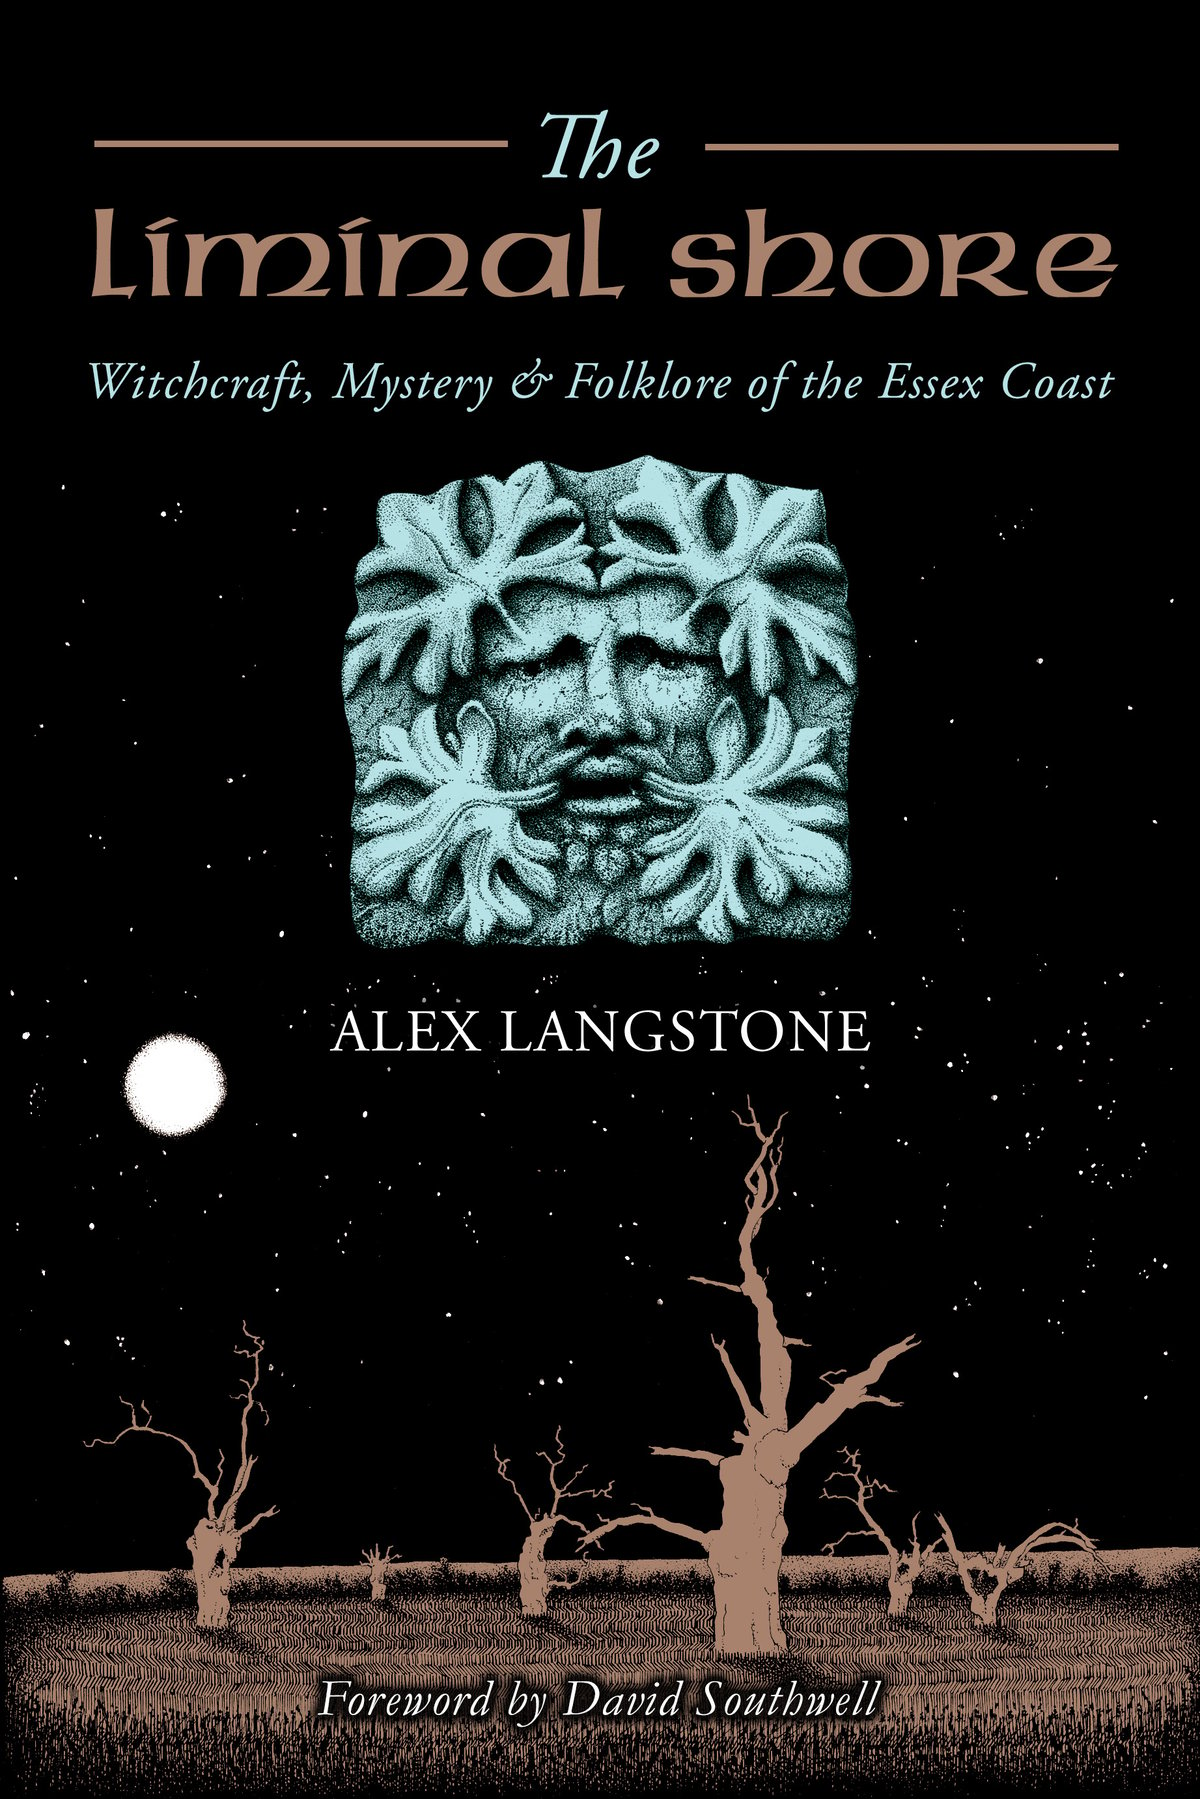 Image of The Liminal Shore: Witchcraft, Mystery & Folklore of the Essex Coast. Buy from Troy Books